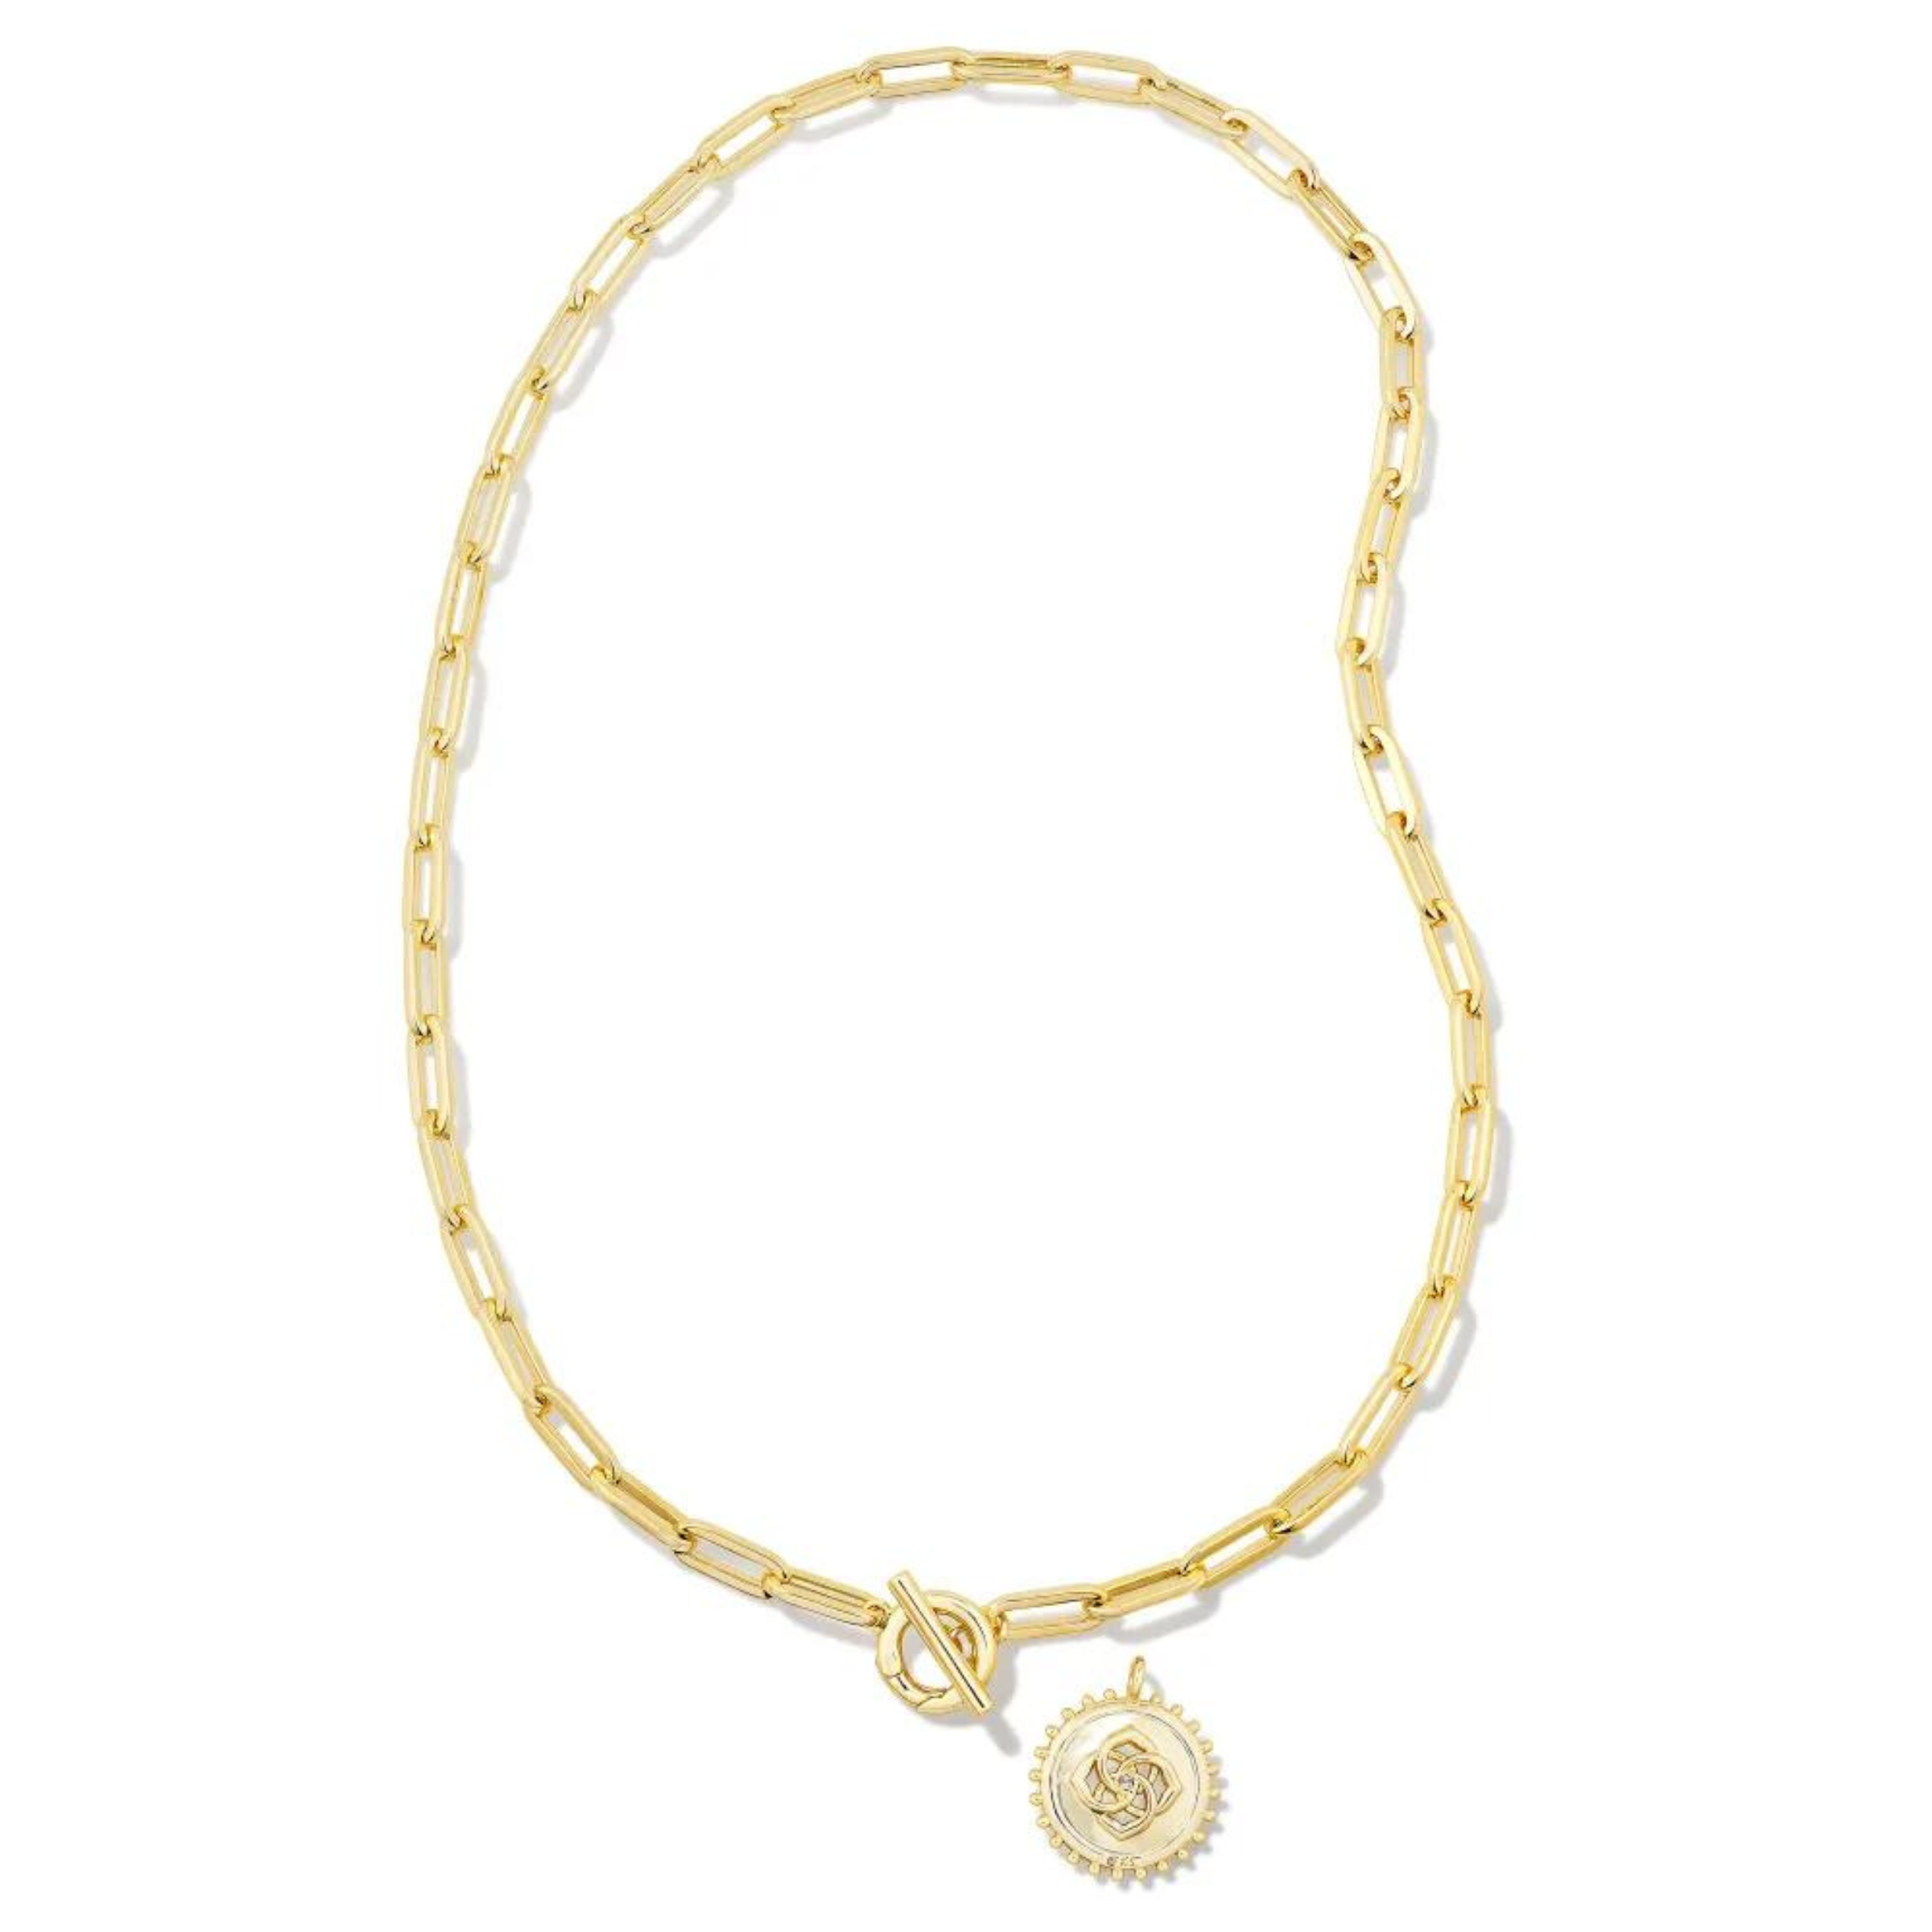 Kendra Scott | Brielle Convertible Medallion Chain Necklace in Gold - Giddy Up Glamour Boutique